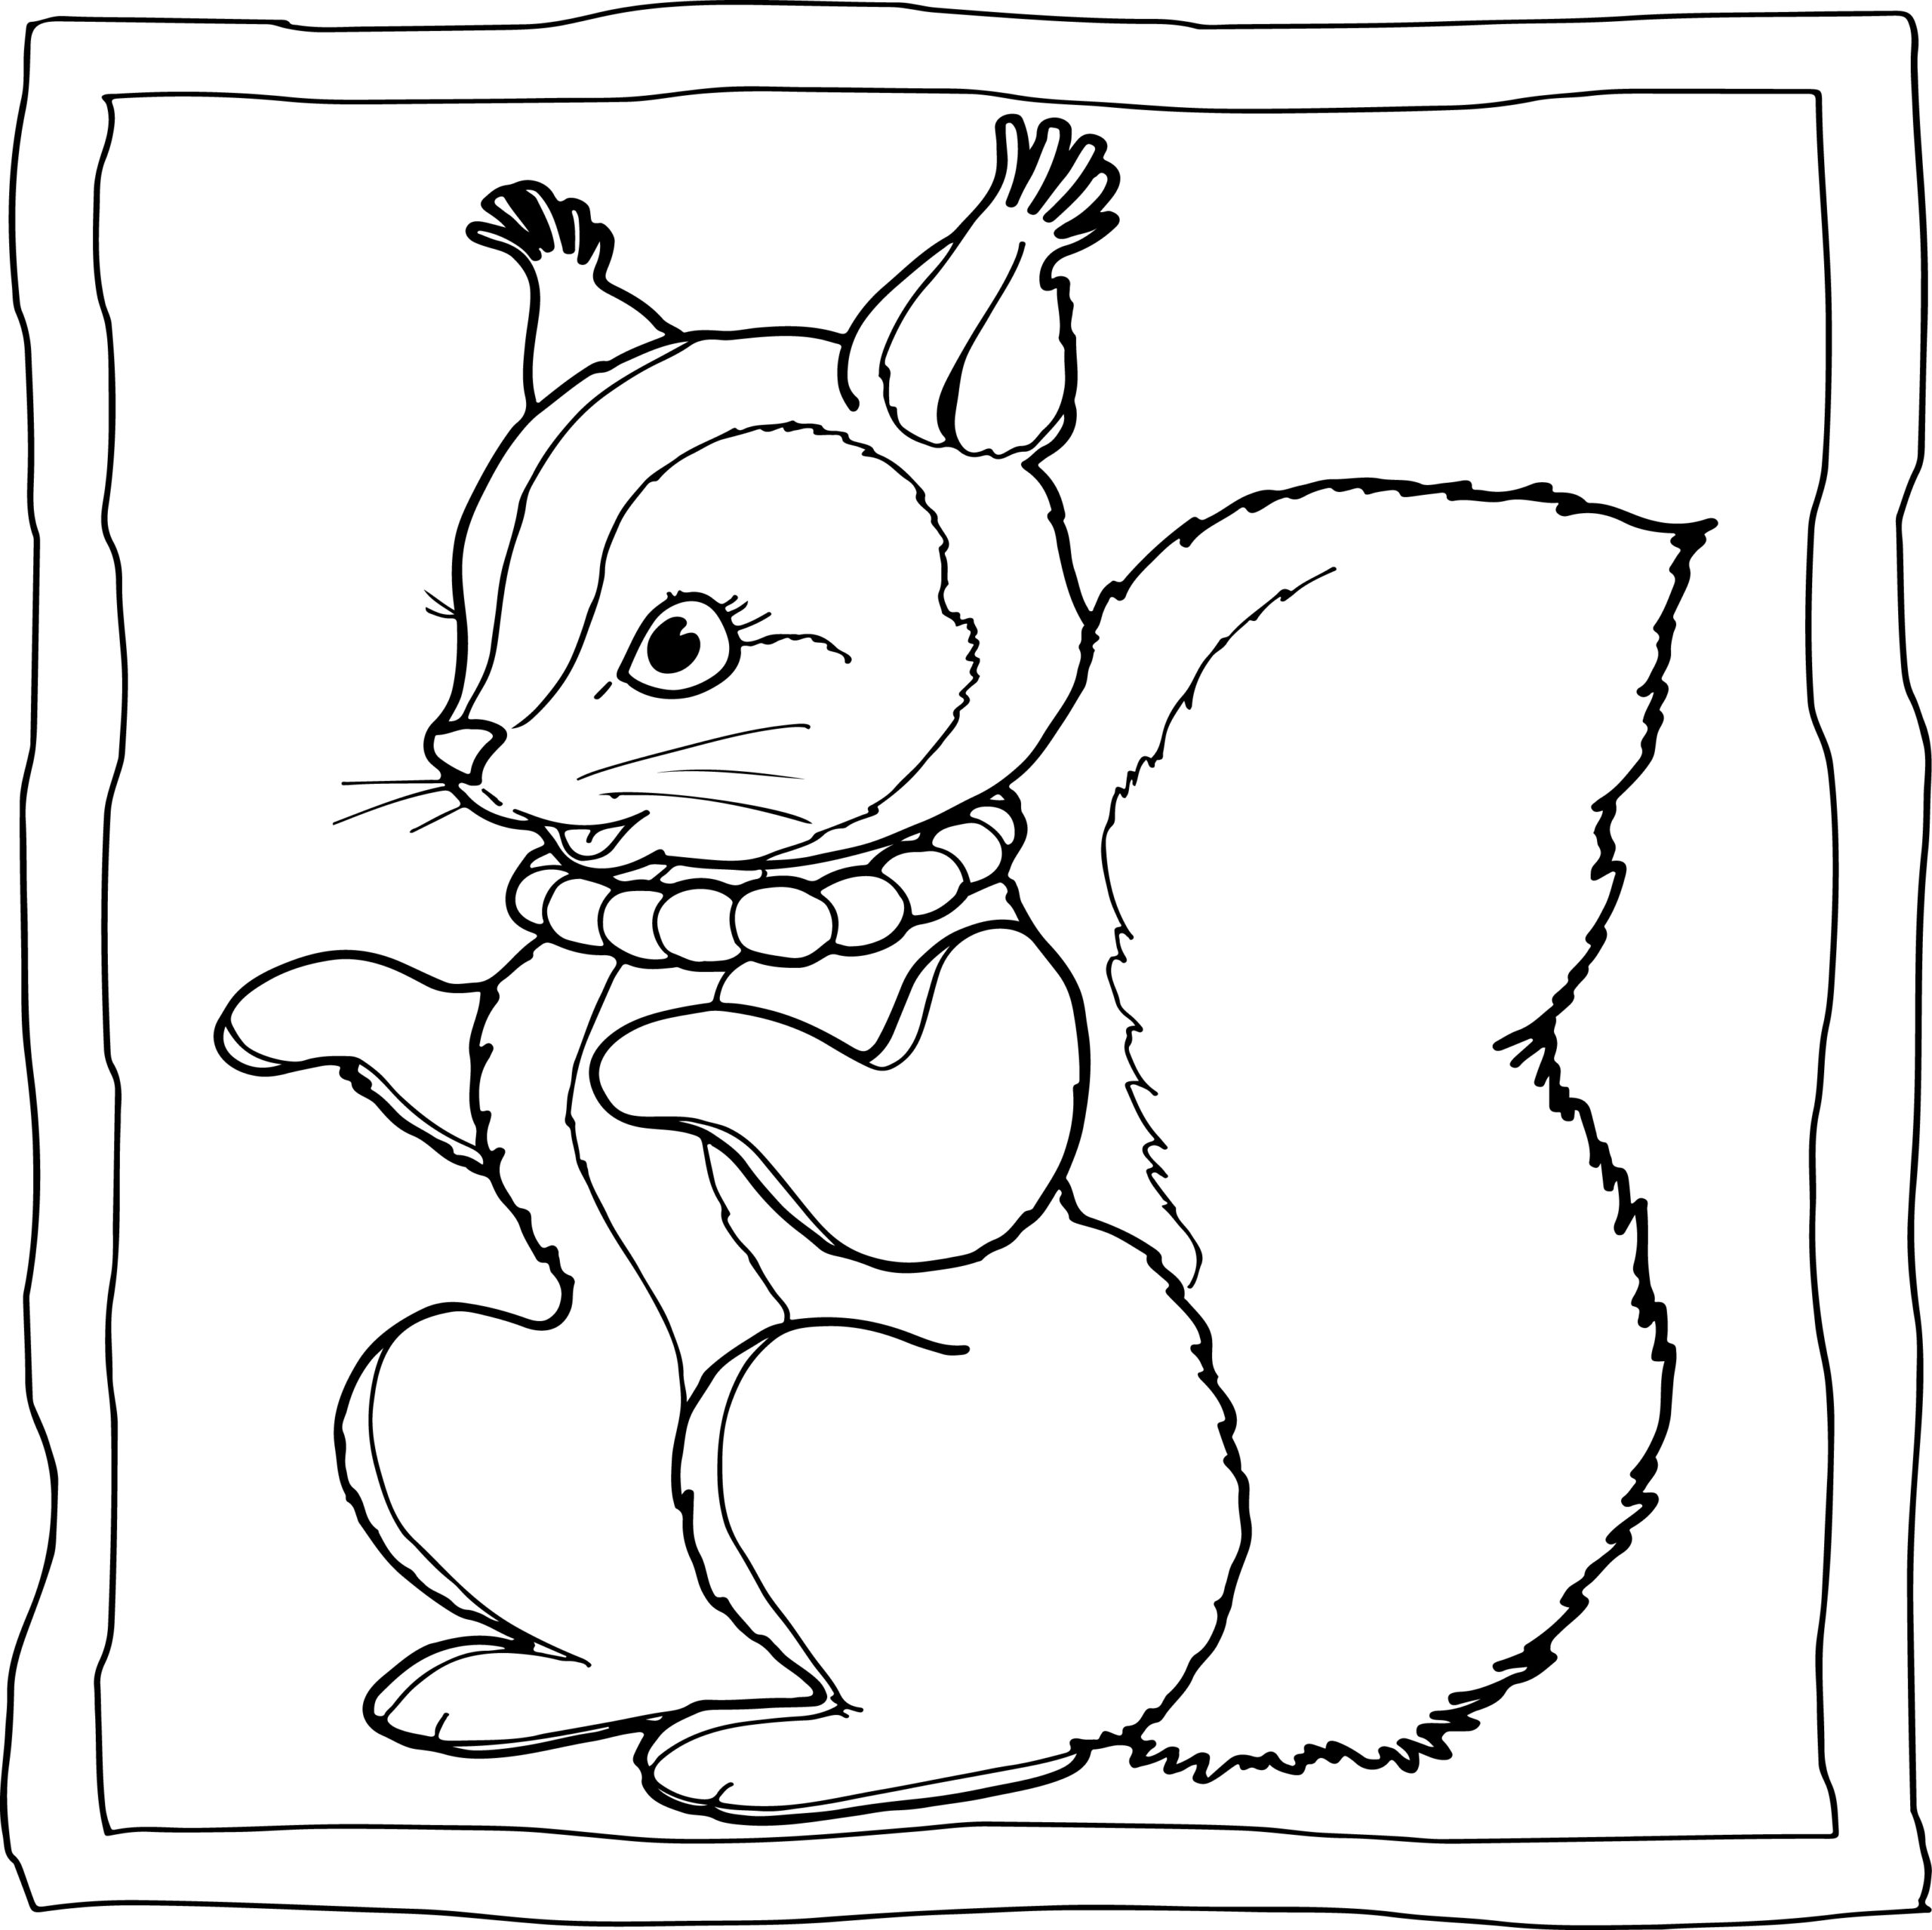 Squirrel coloring book easy and fun squirrels coloring pages for kids made by teachers